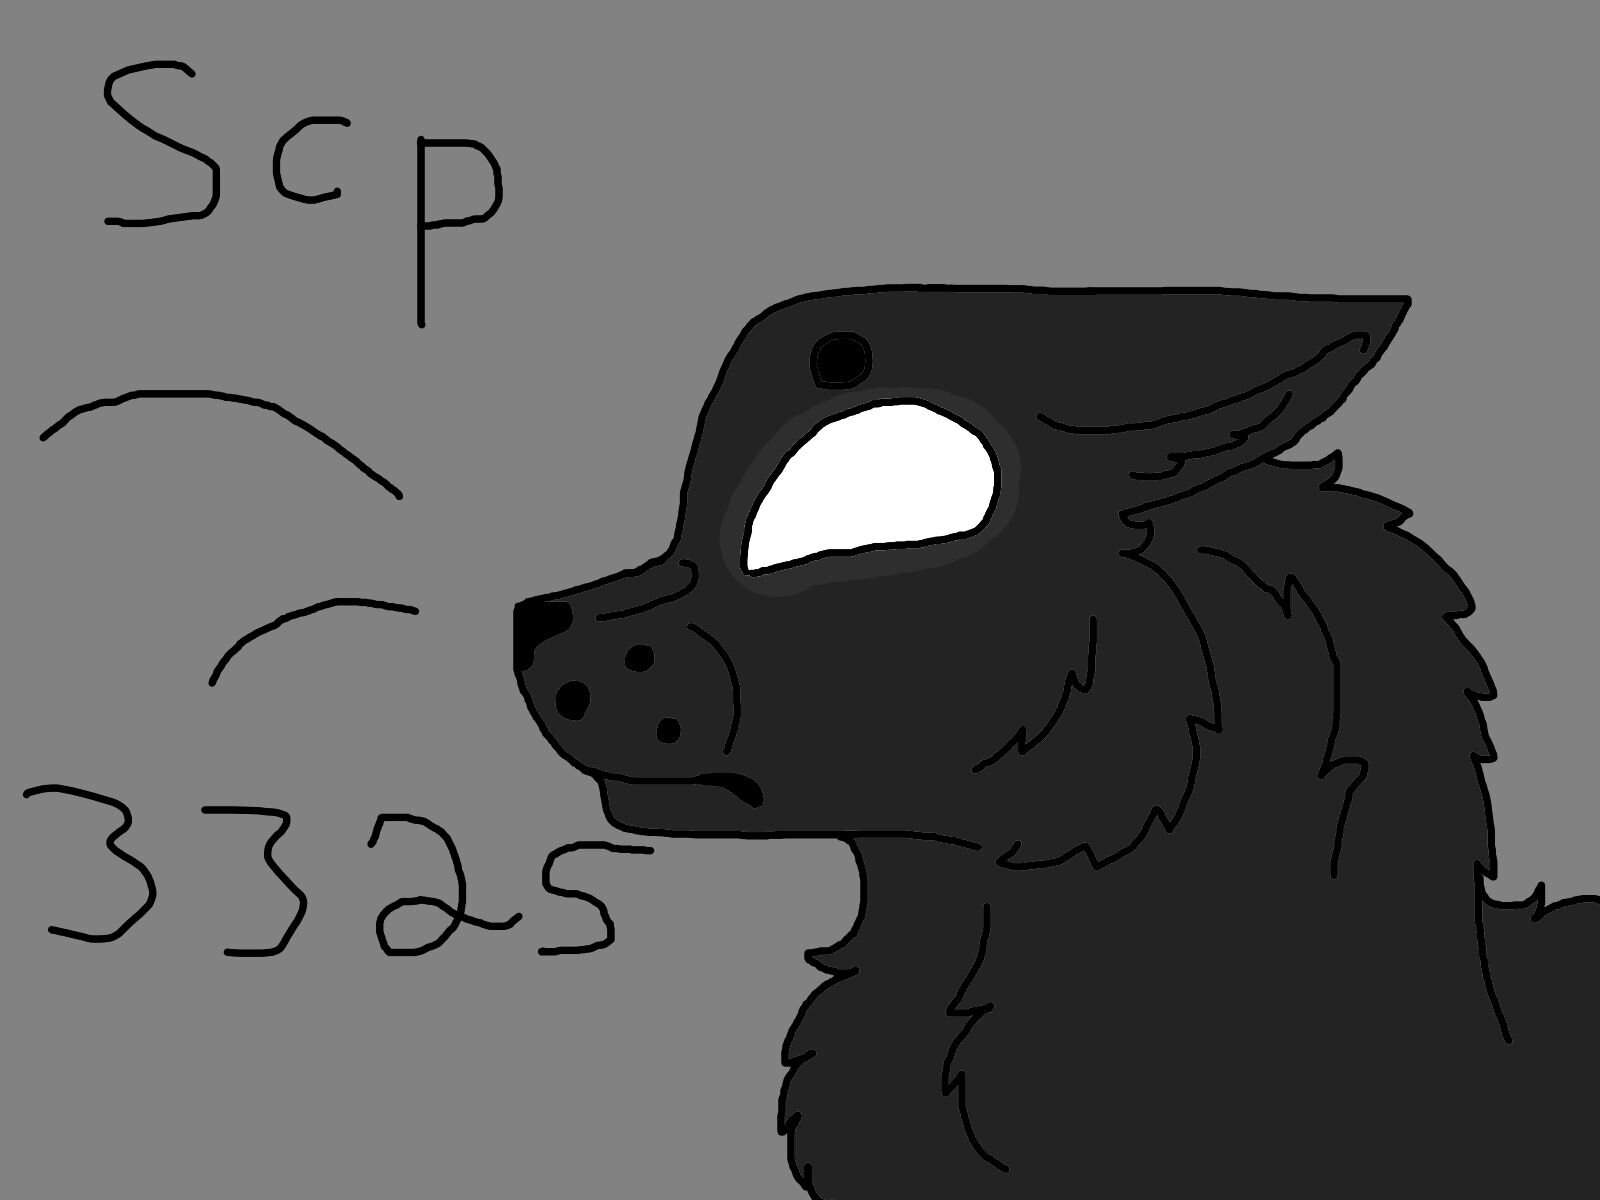 Scp 3325